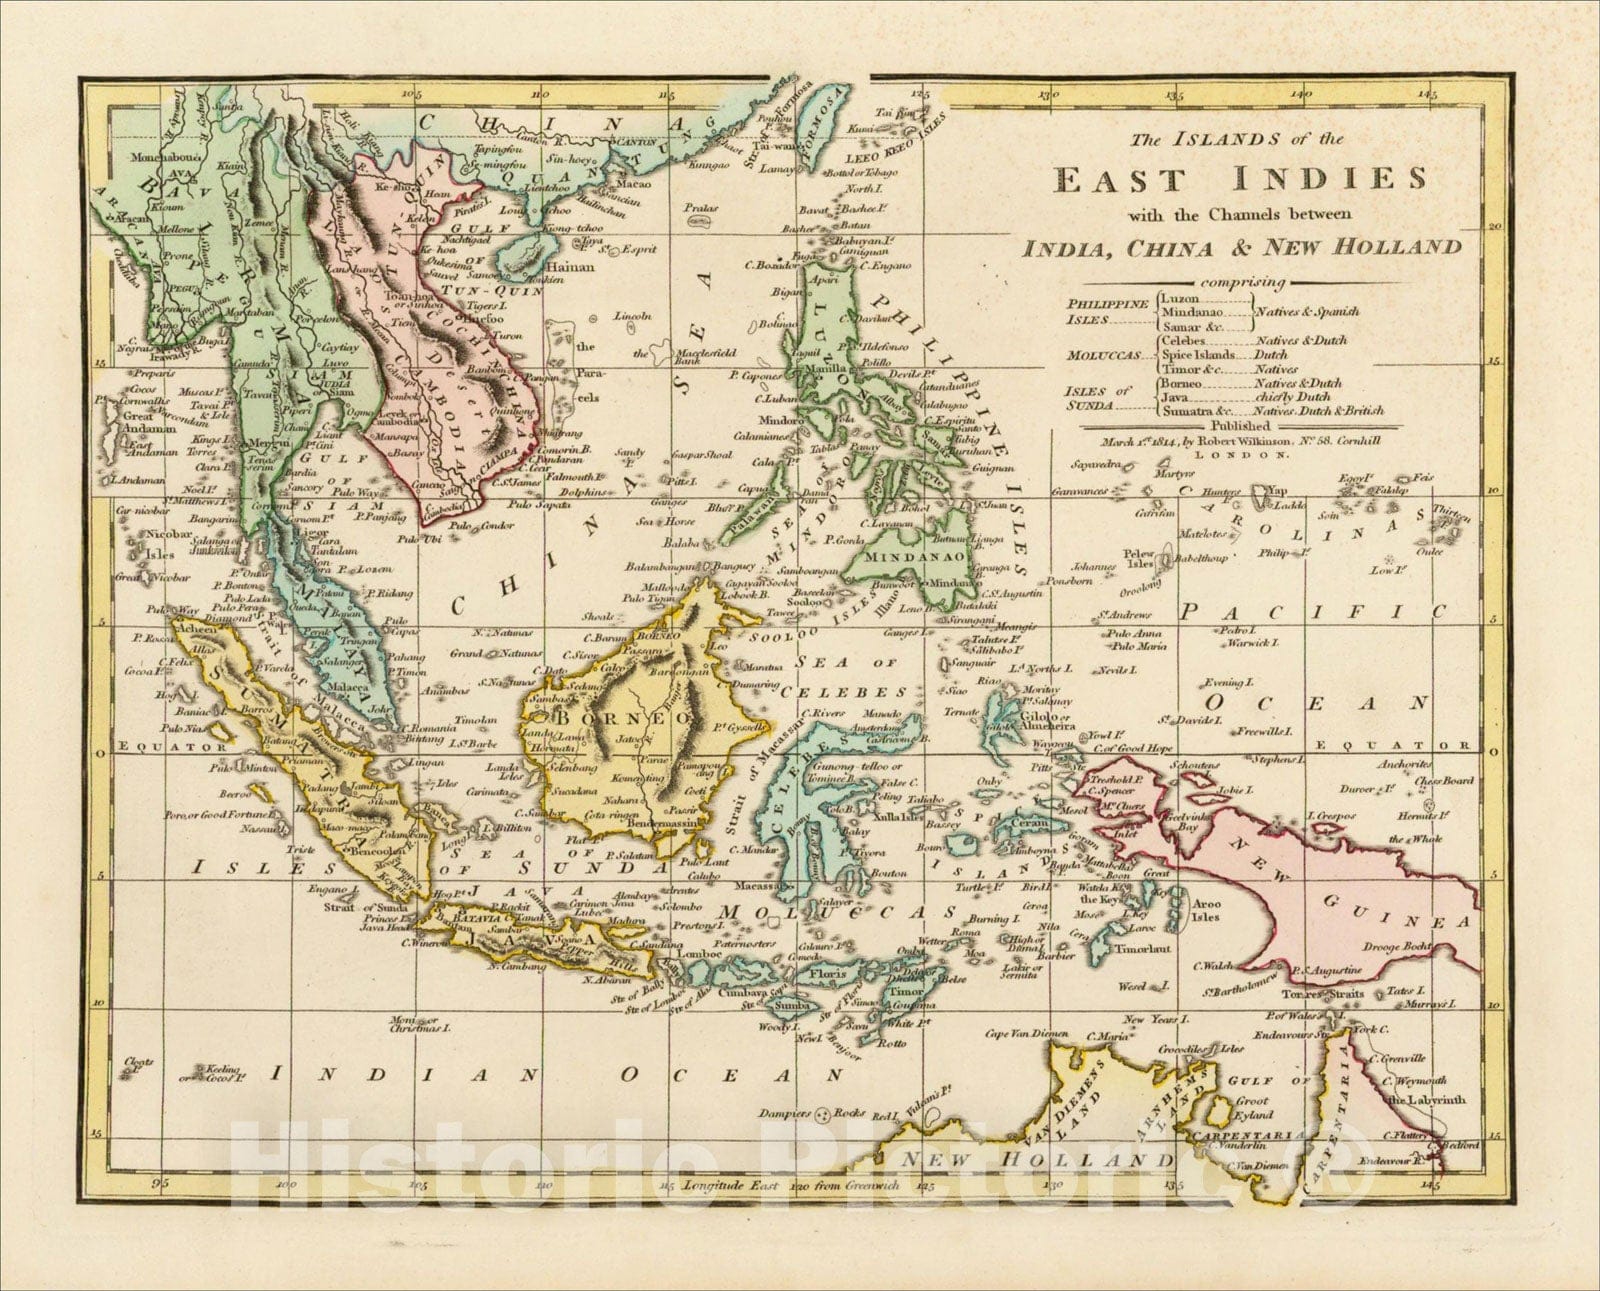 Historic Map : The Islands of the East Indies with the Channels between India, China & New Holland, 1814, Robert Wilkinson, v1, Vintage Wall Art